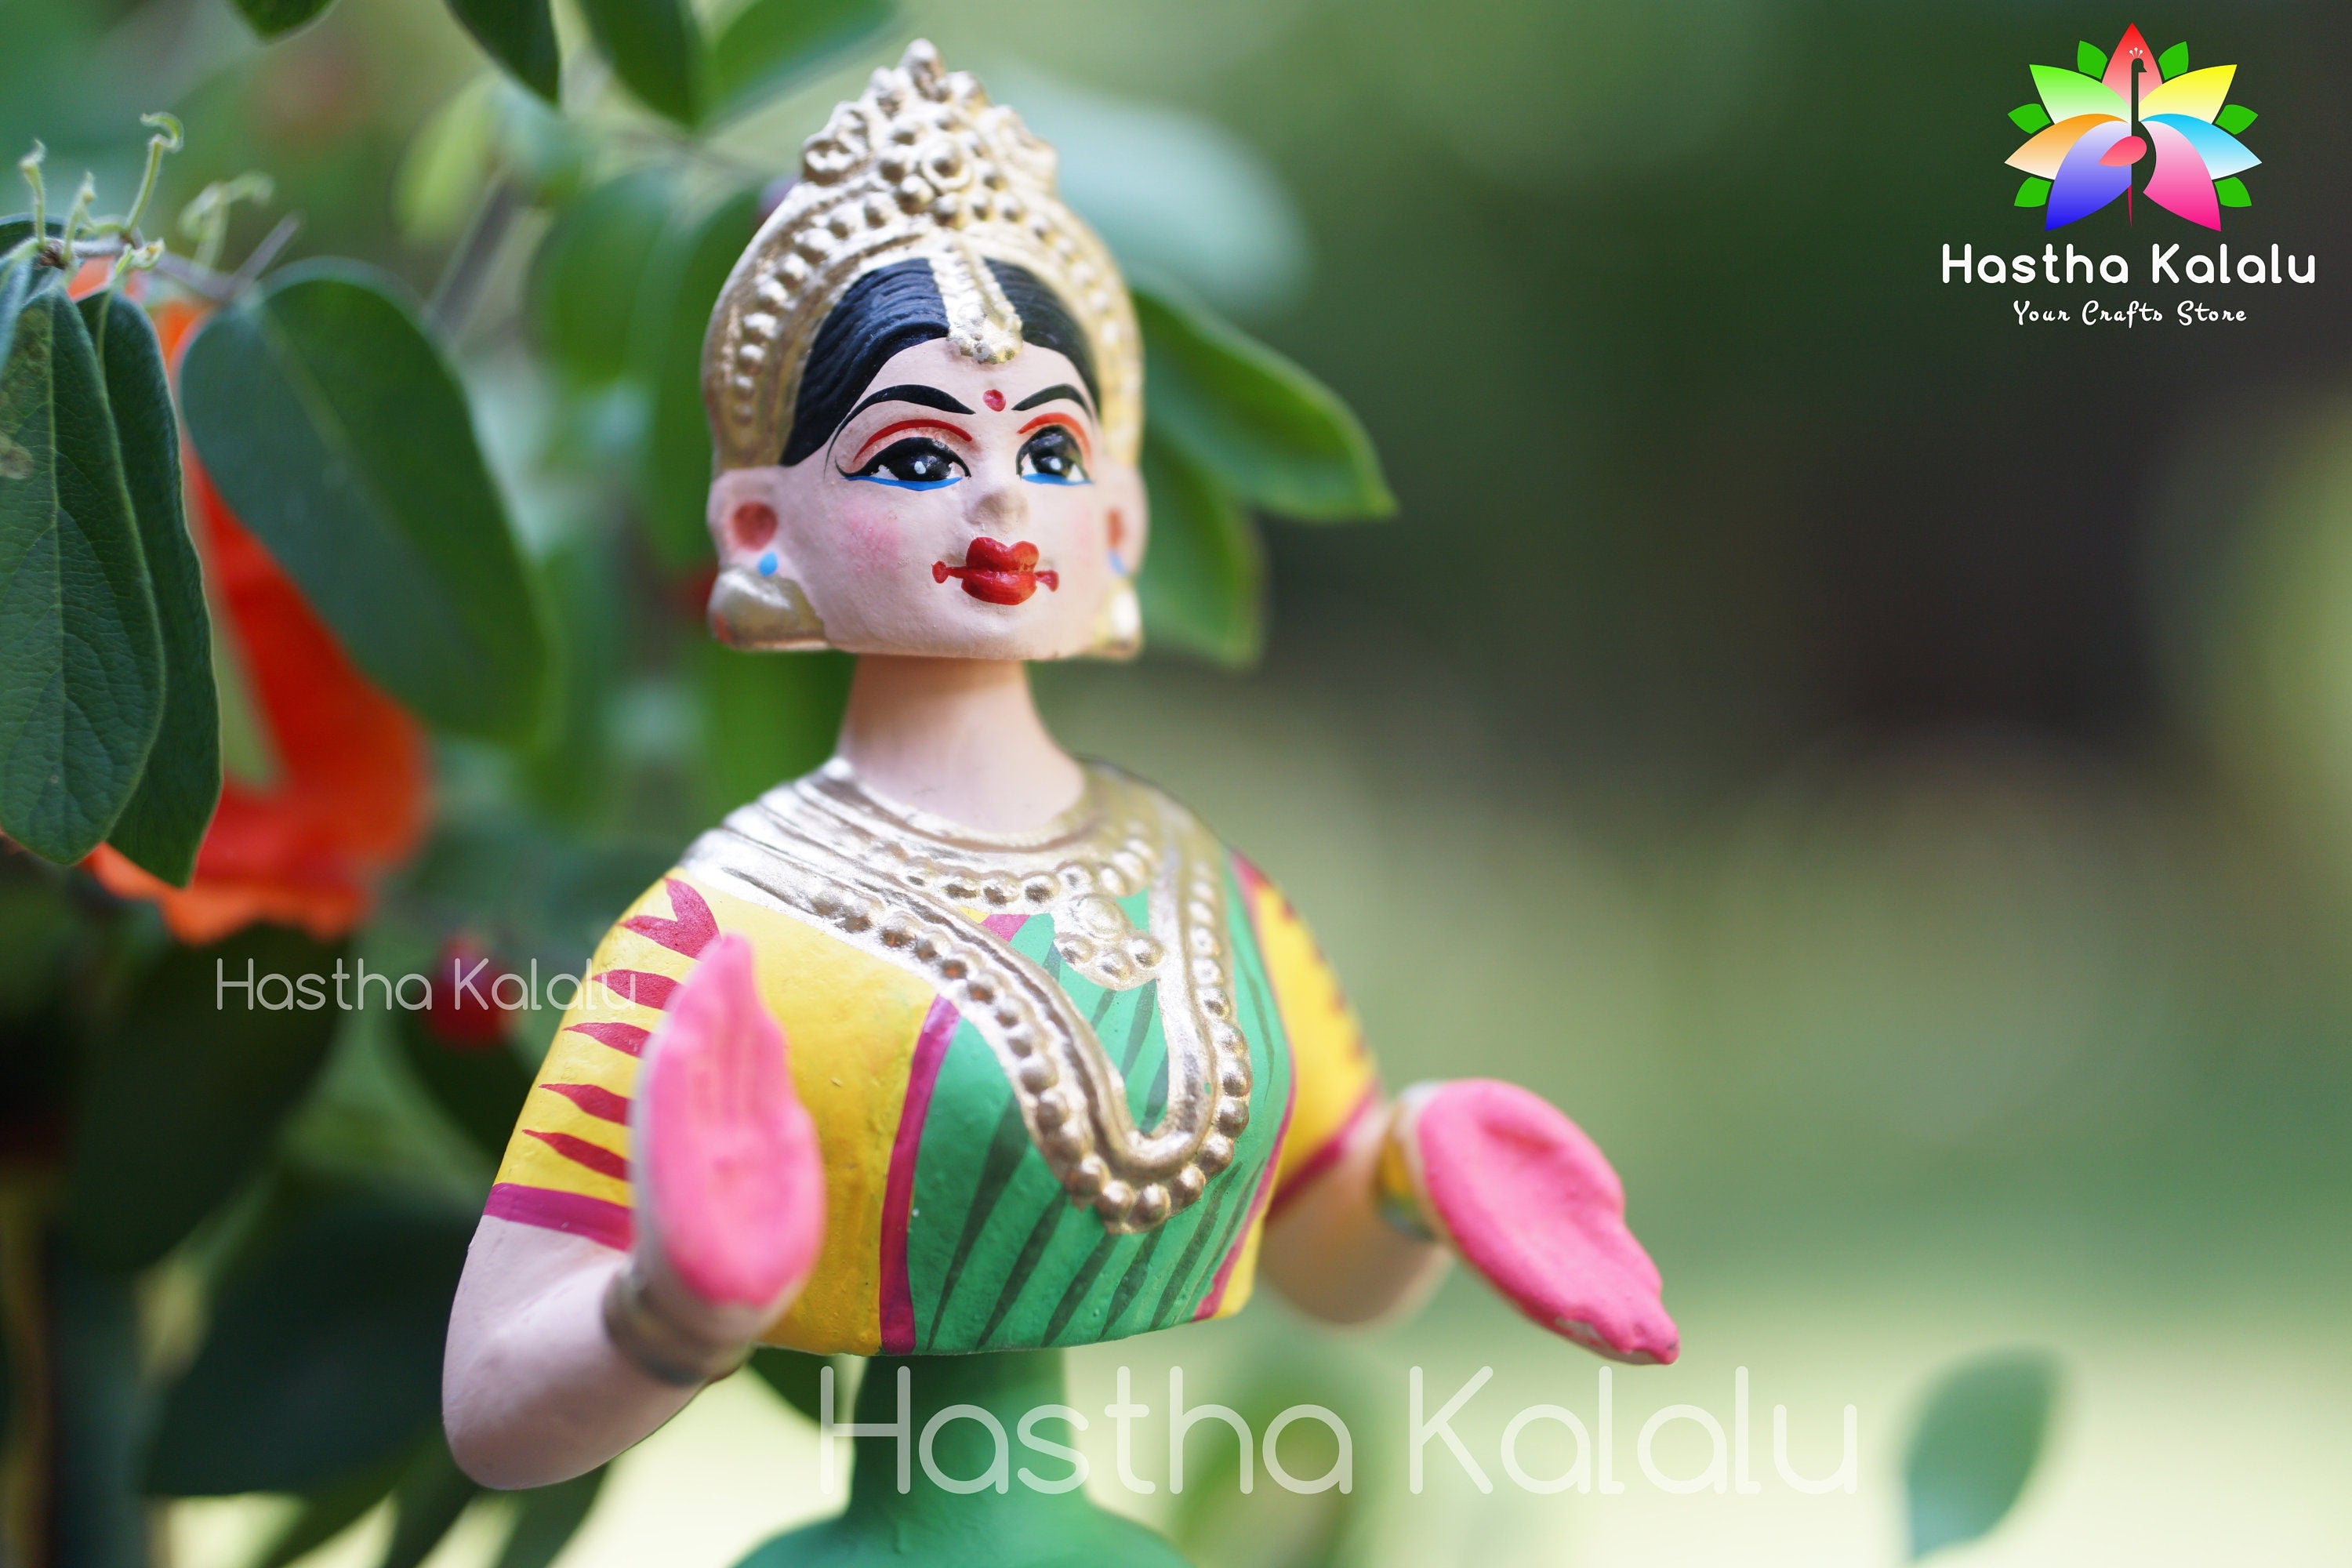 Kondapalli Dancing Doll | Paper Mache Dancing Doll Painted with Vegetable Colors / Iconic Dancing Doll of India/abomma/ gift for her